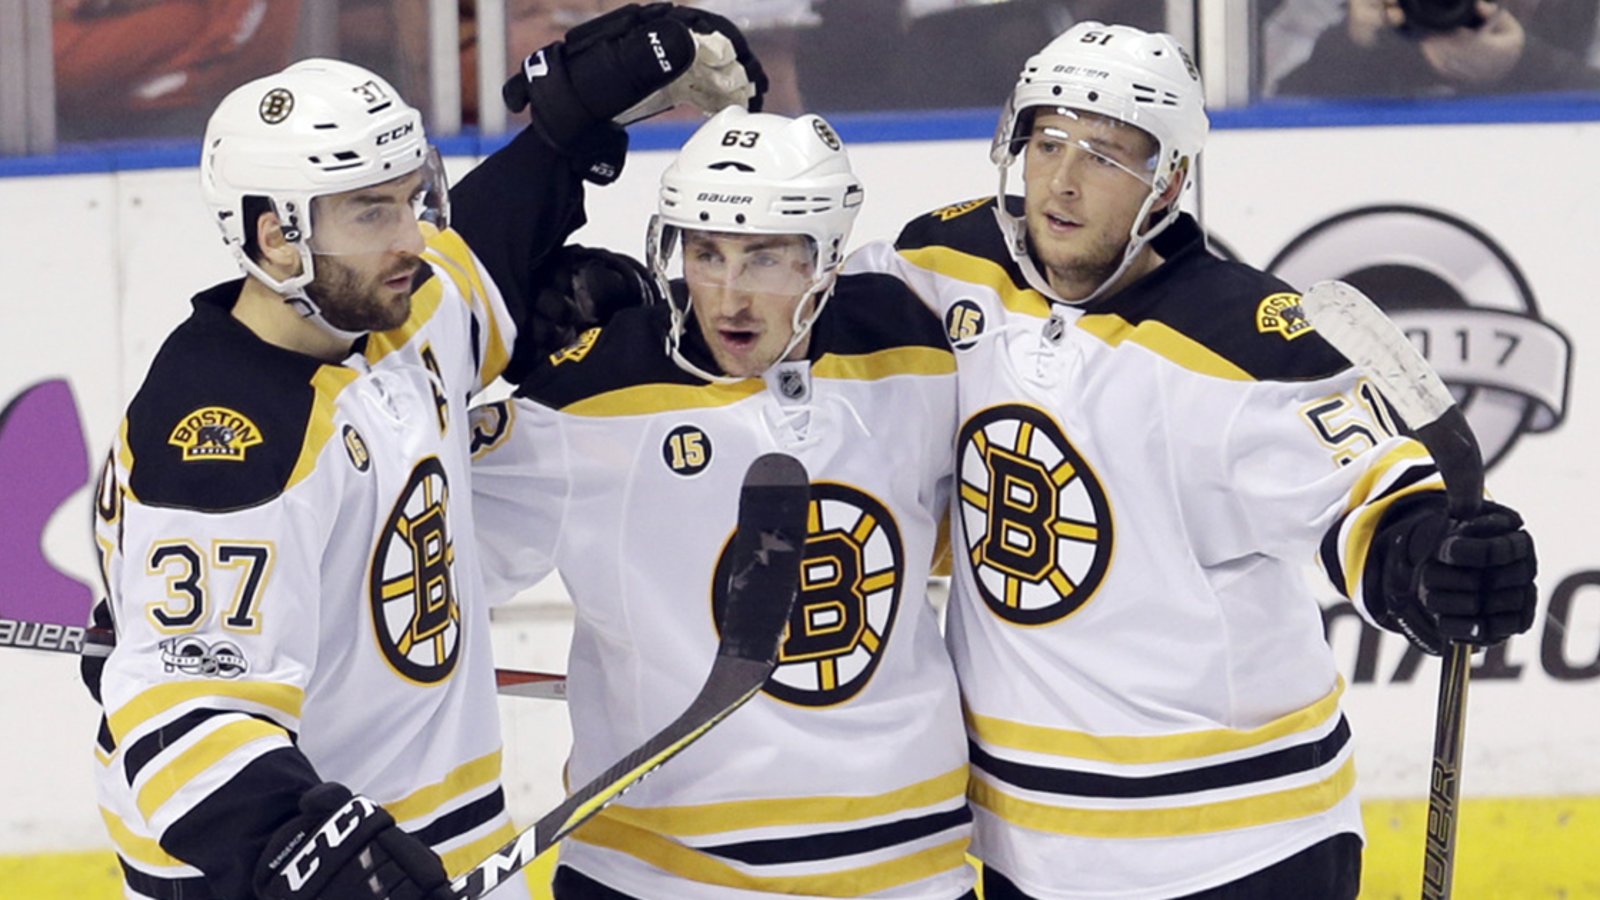 Marchand and Spooner set to return?